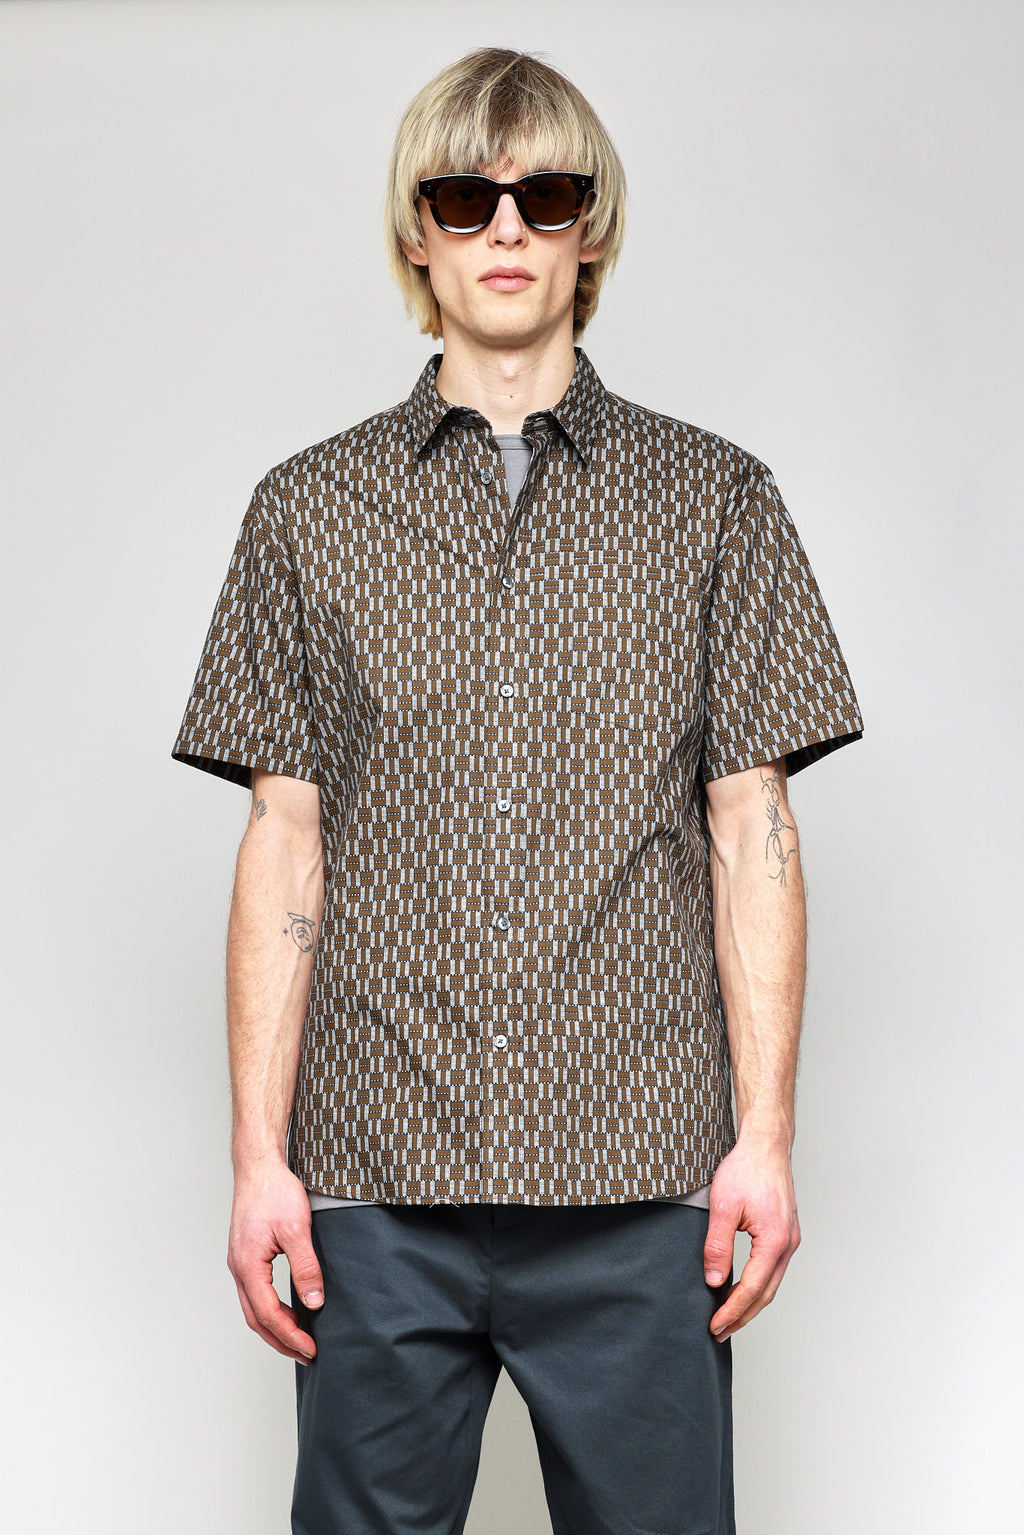 Japanese Graphic Grid Print in Khaki and Blue 01